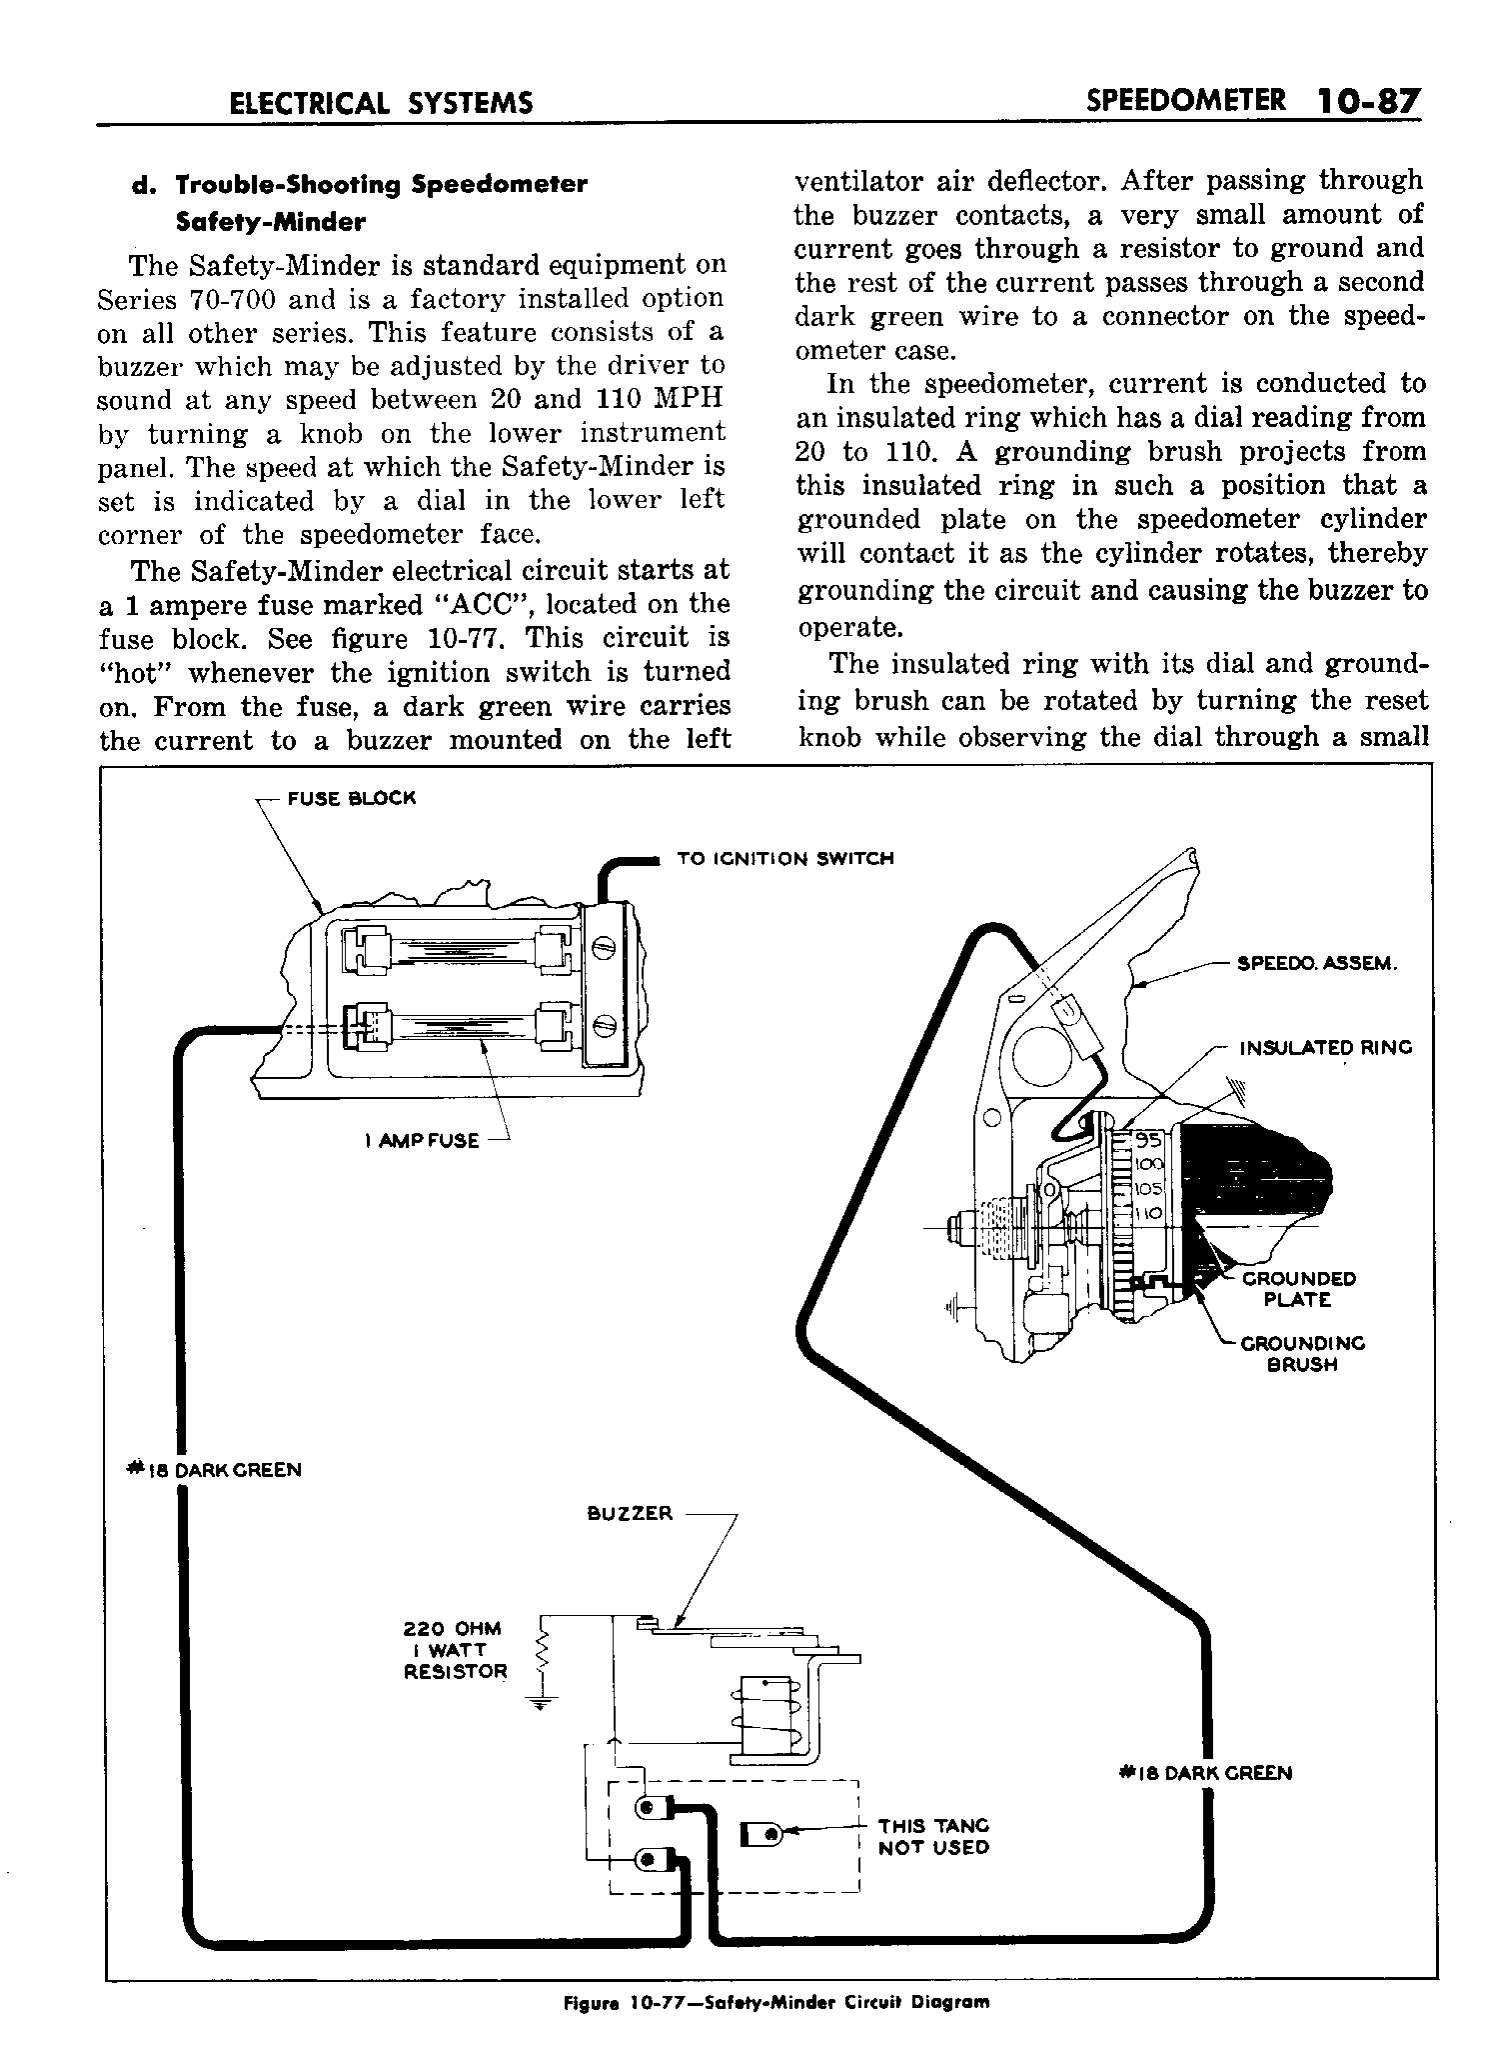 n_11 1958 Buick Shop Manual - Electrical Systems_87.jpg